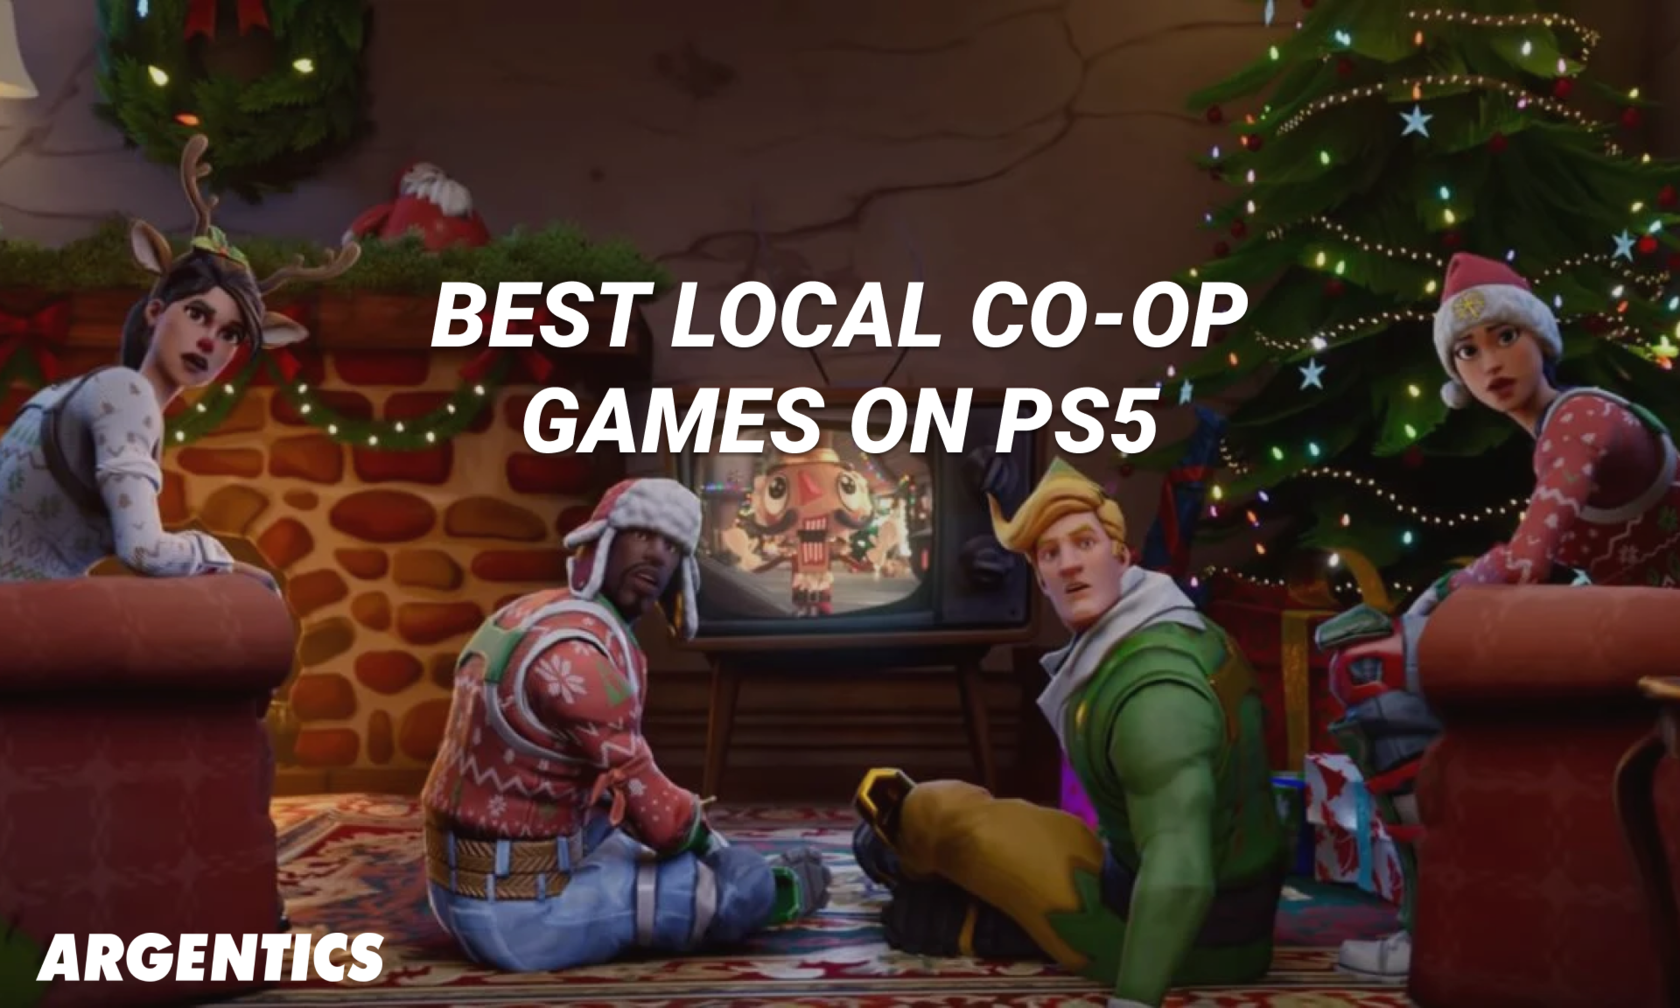 Best PS5 couch co-op games: The top 5 titles to play